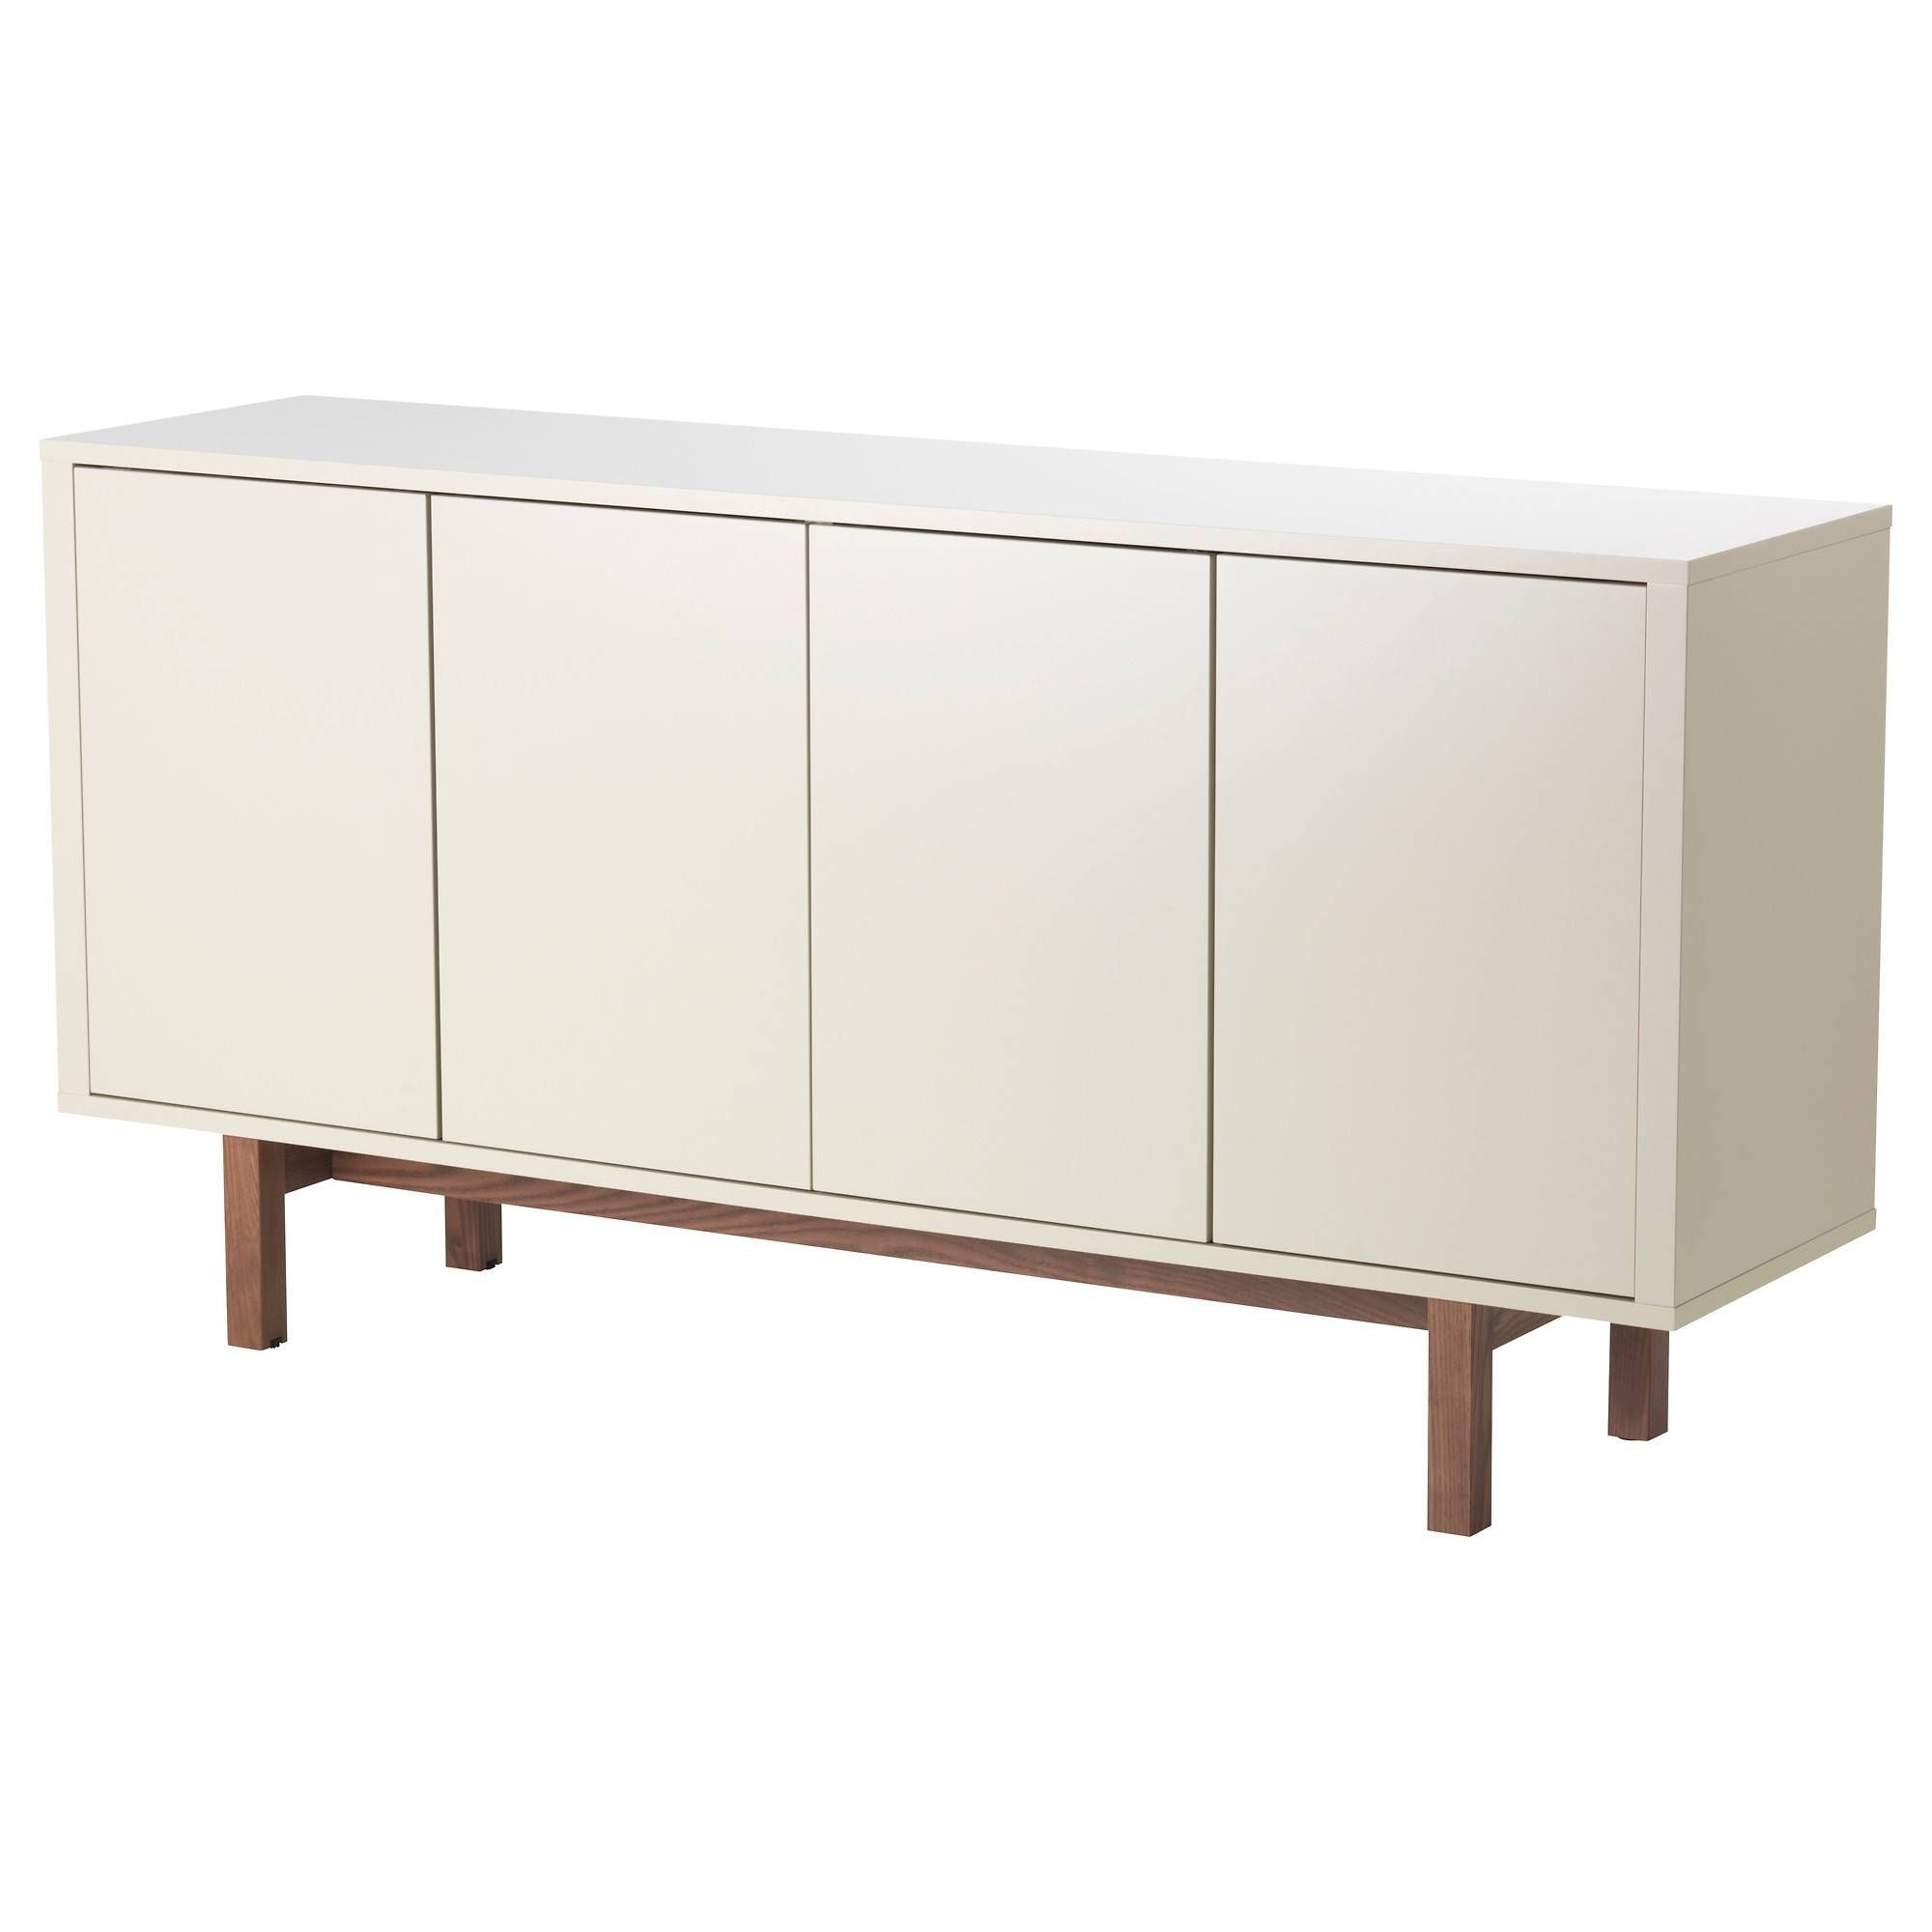 Awesome Ikea Stockholm Sideboard – Bjdgjy Within Most Popular Stockholm Sideboards (View 6 of 15)